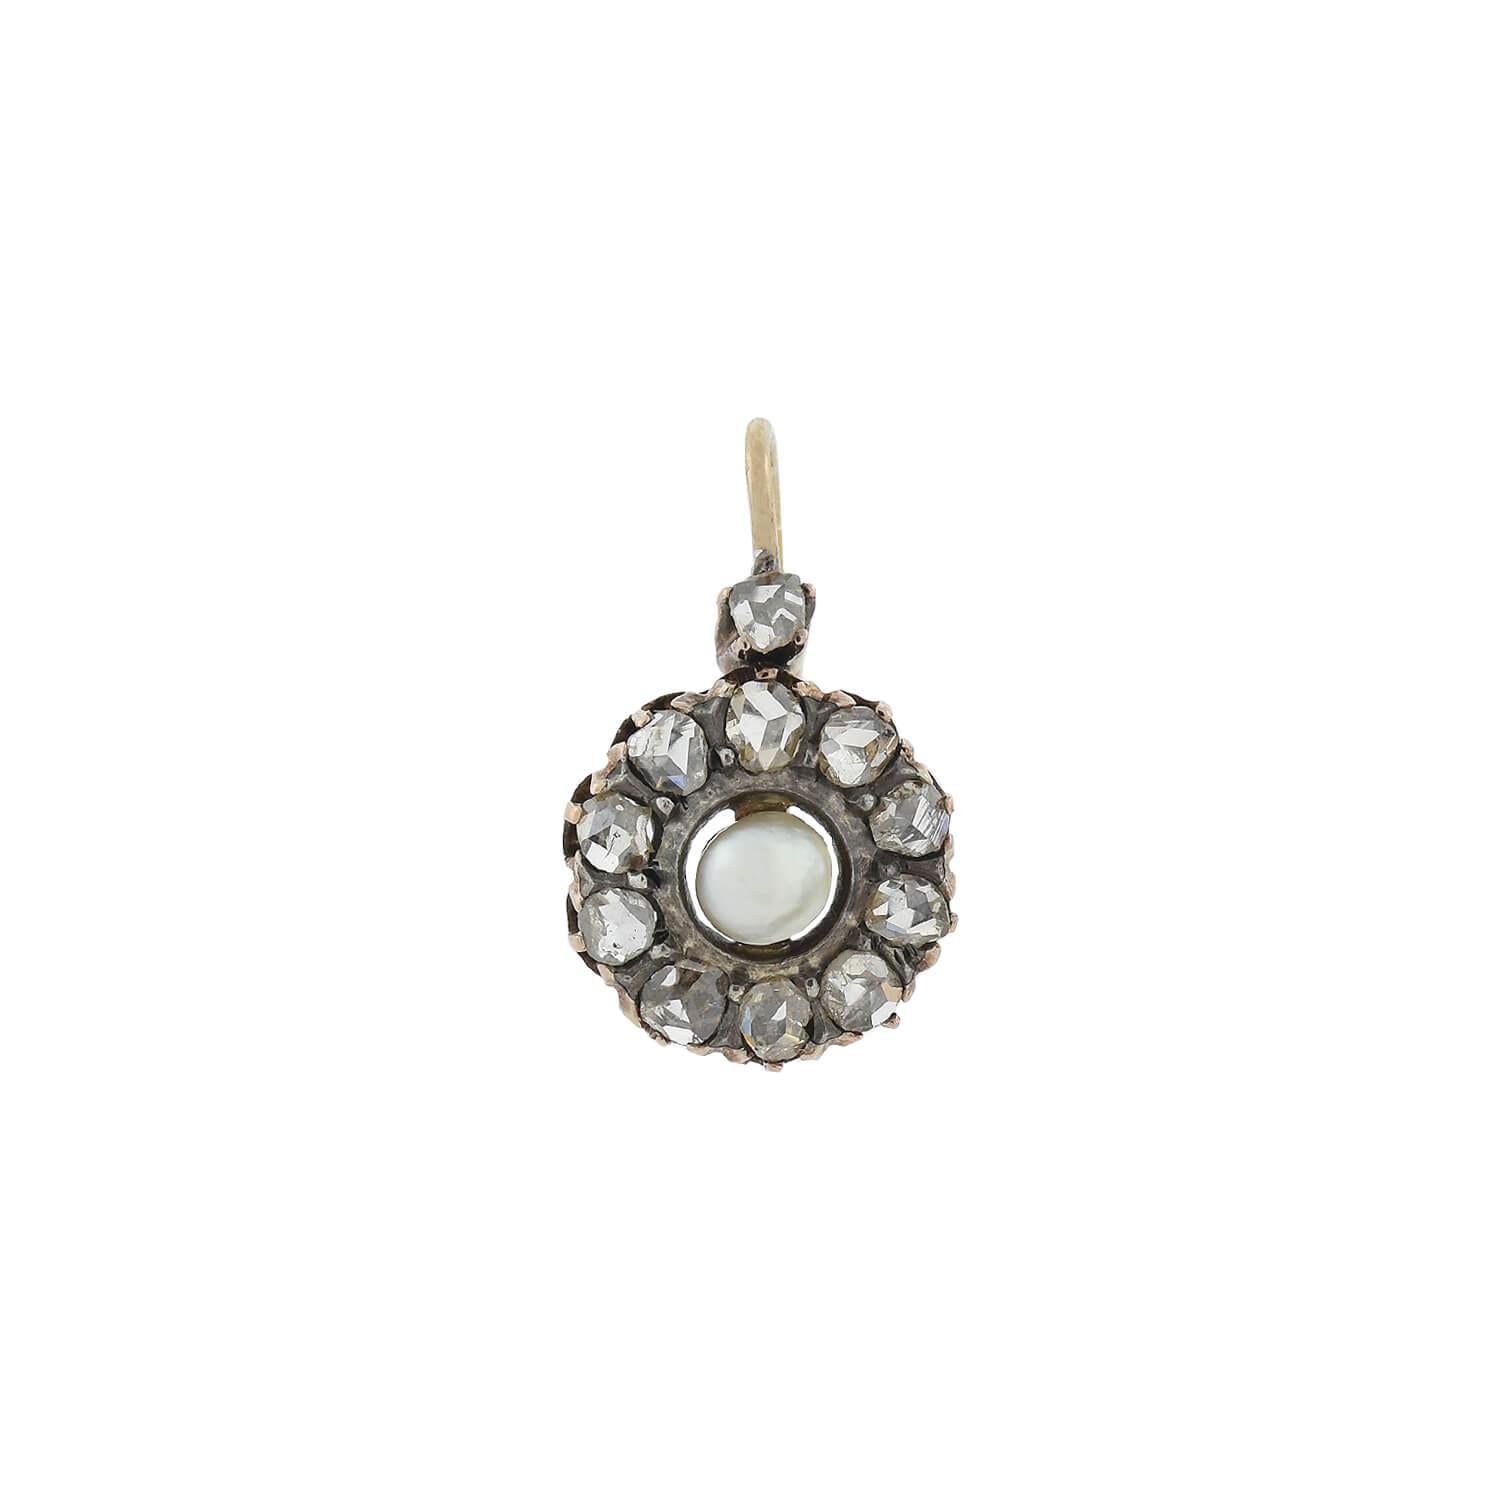 An elegant pair of earrings from the Victorian (ca1880s) era! Crafted in 18kt yellow gold and topped in sterling silver, these earrings feature 10 glittering Rose Cut diamonds in a cluster setting, adorning a lustrous natural white pearl. An